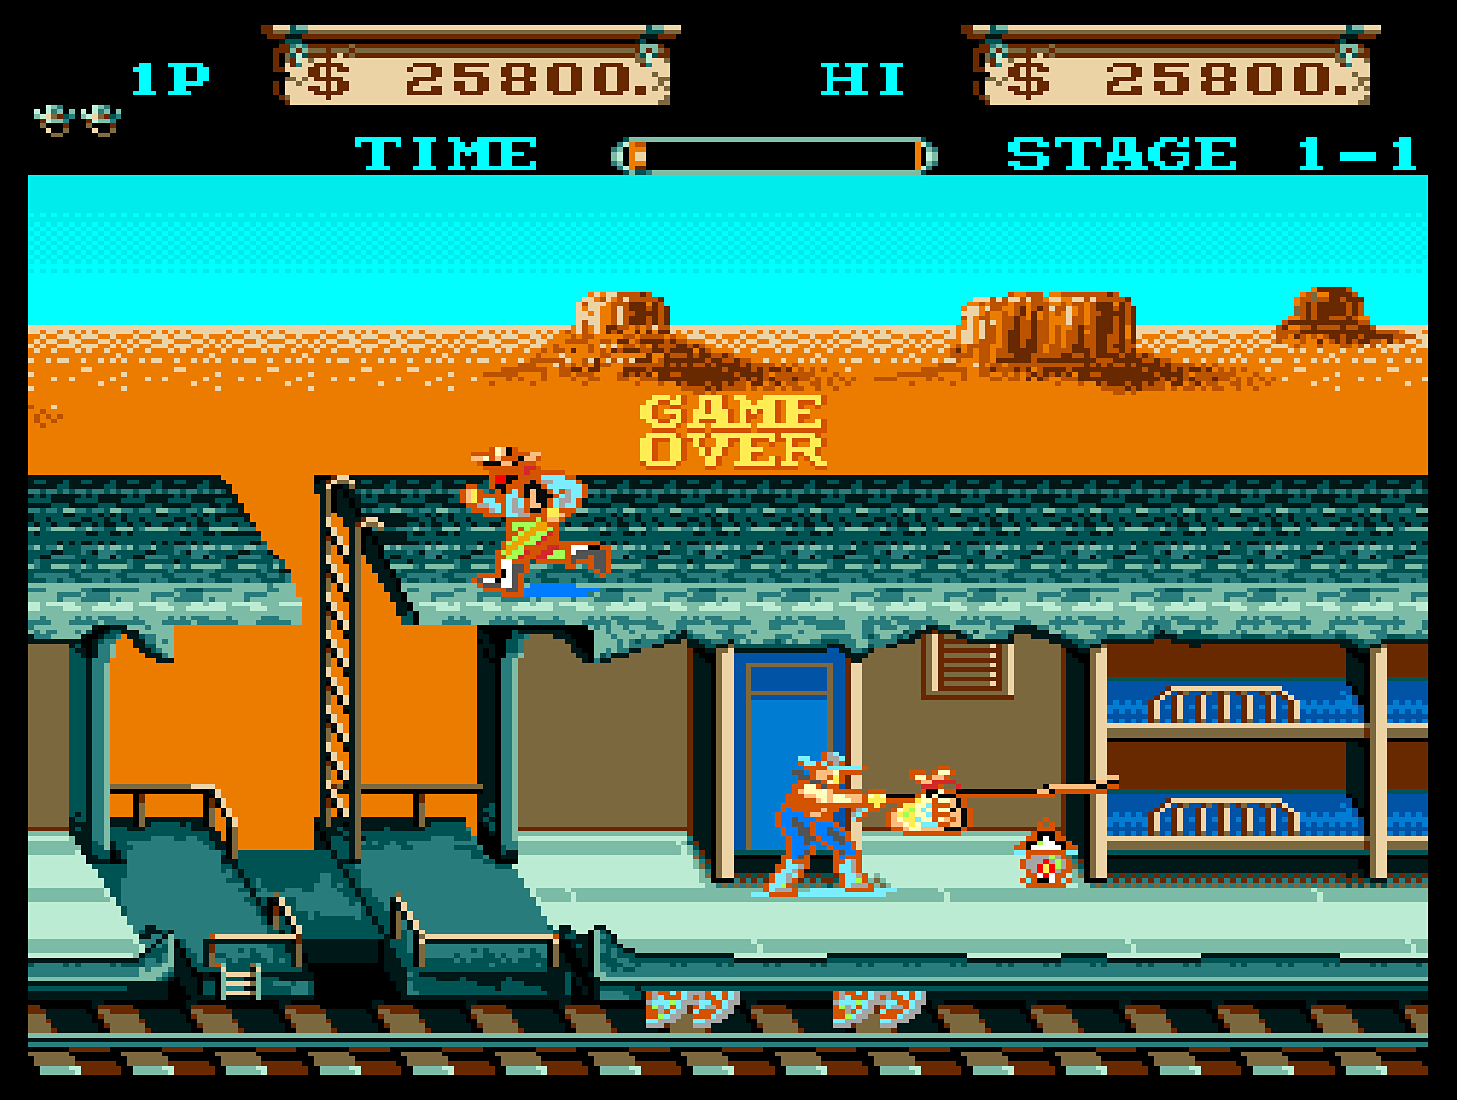 Far West, Arcade Video game by Unknown(198?)